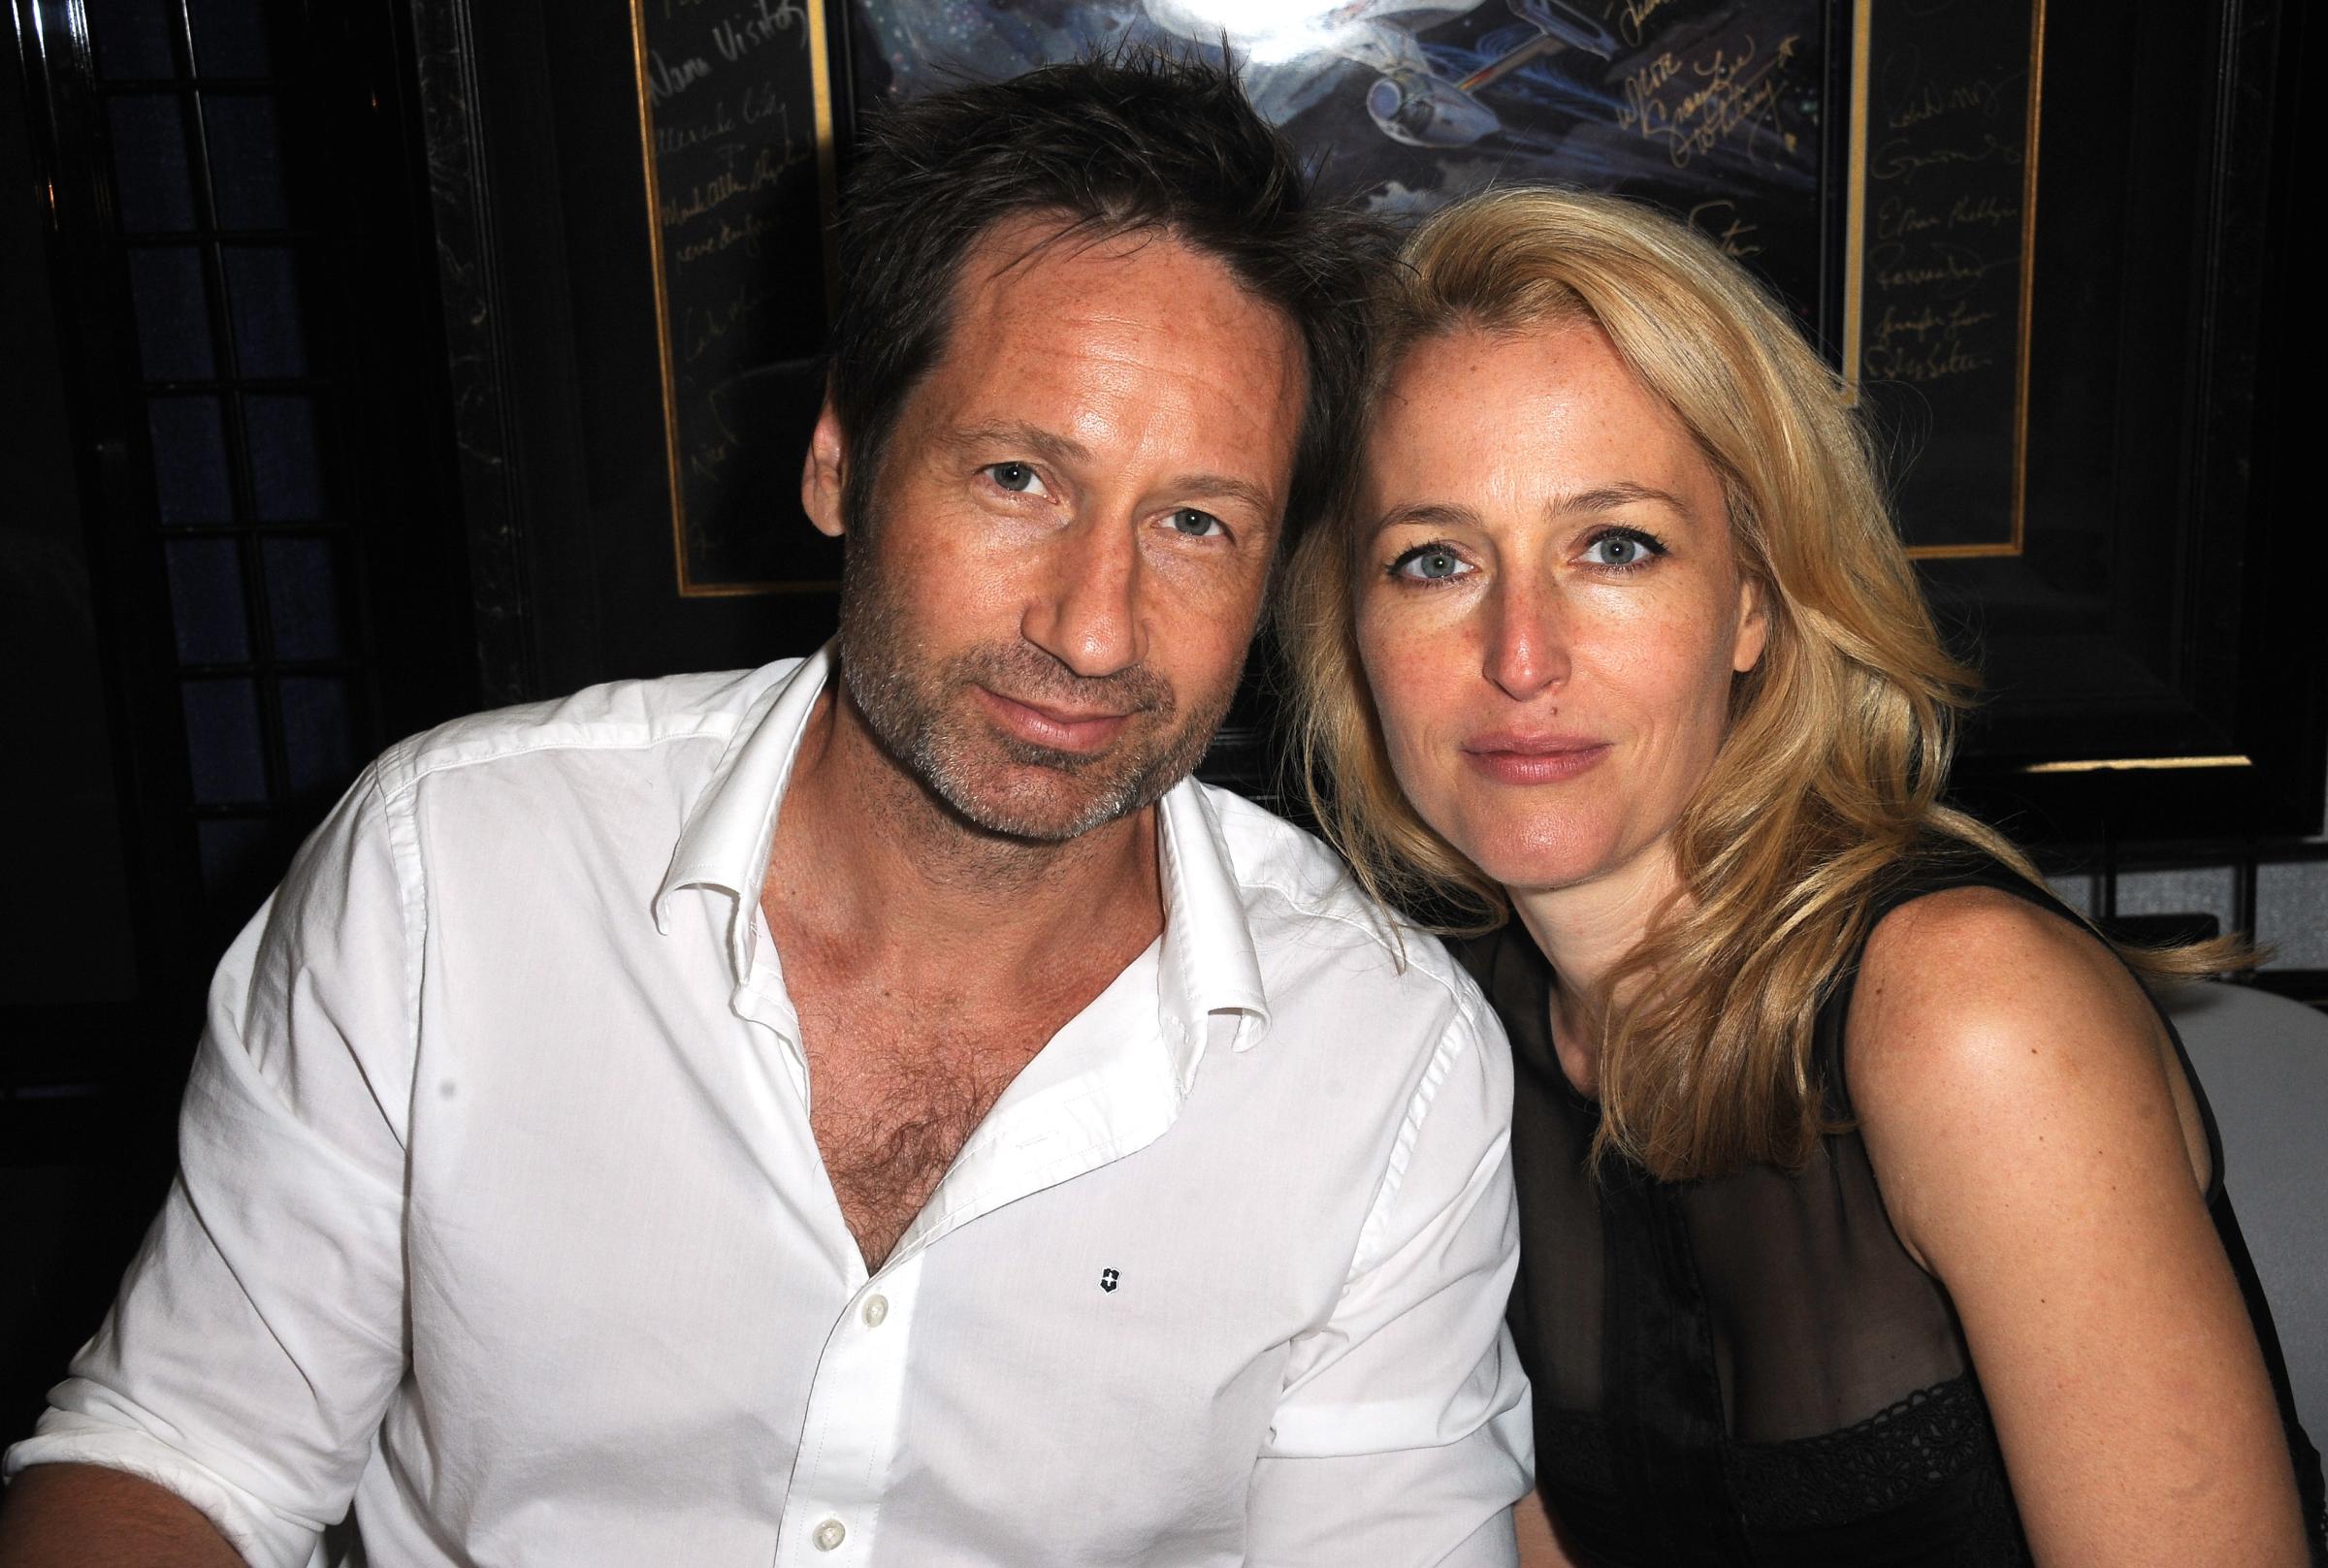 David Duchovny and Gillian Anderson are seen at Comic-Con in San Diego, Calif. on July 18, 2012.